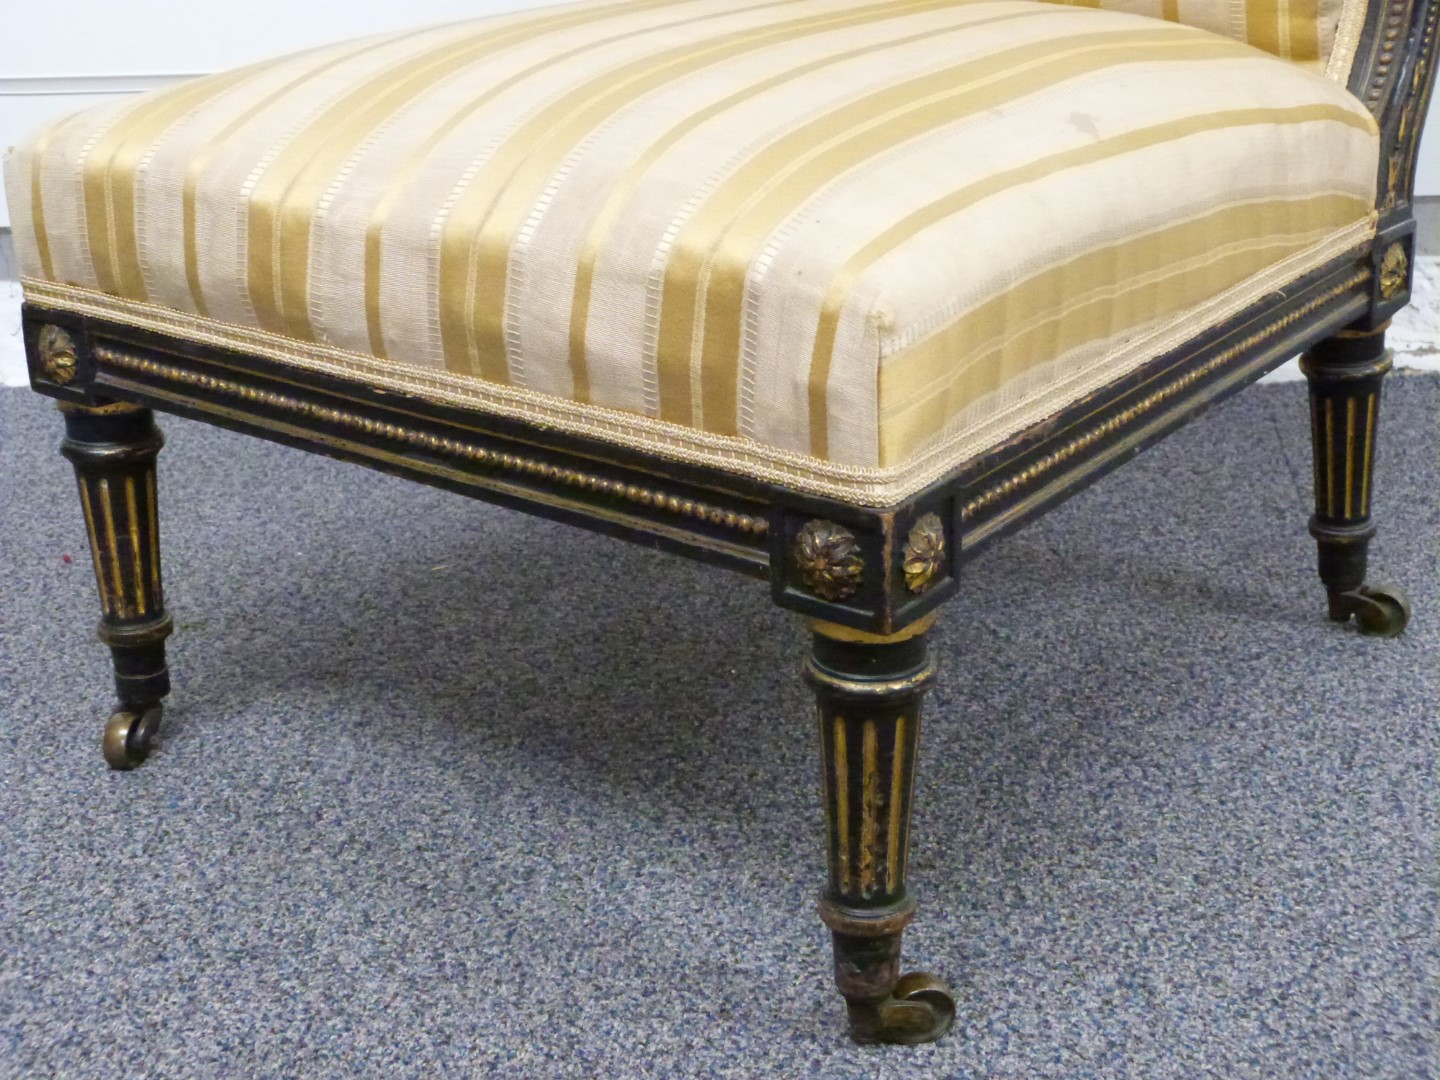 A 19thC upholstered nursing chair with ebonised and gilt decoration - Image 2 of 3